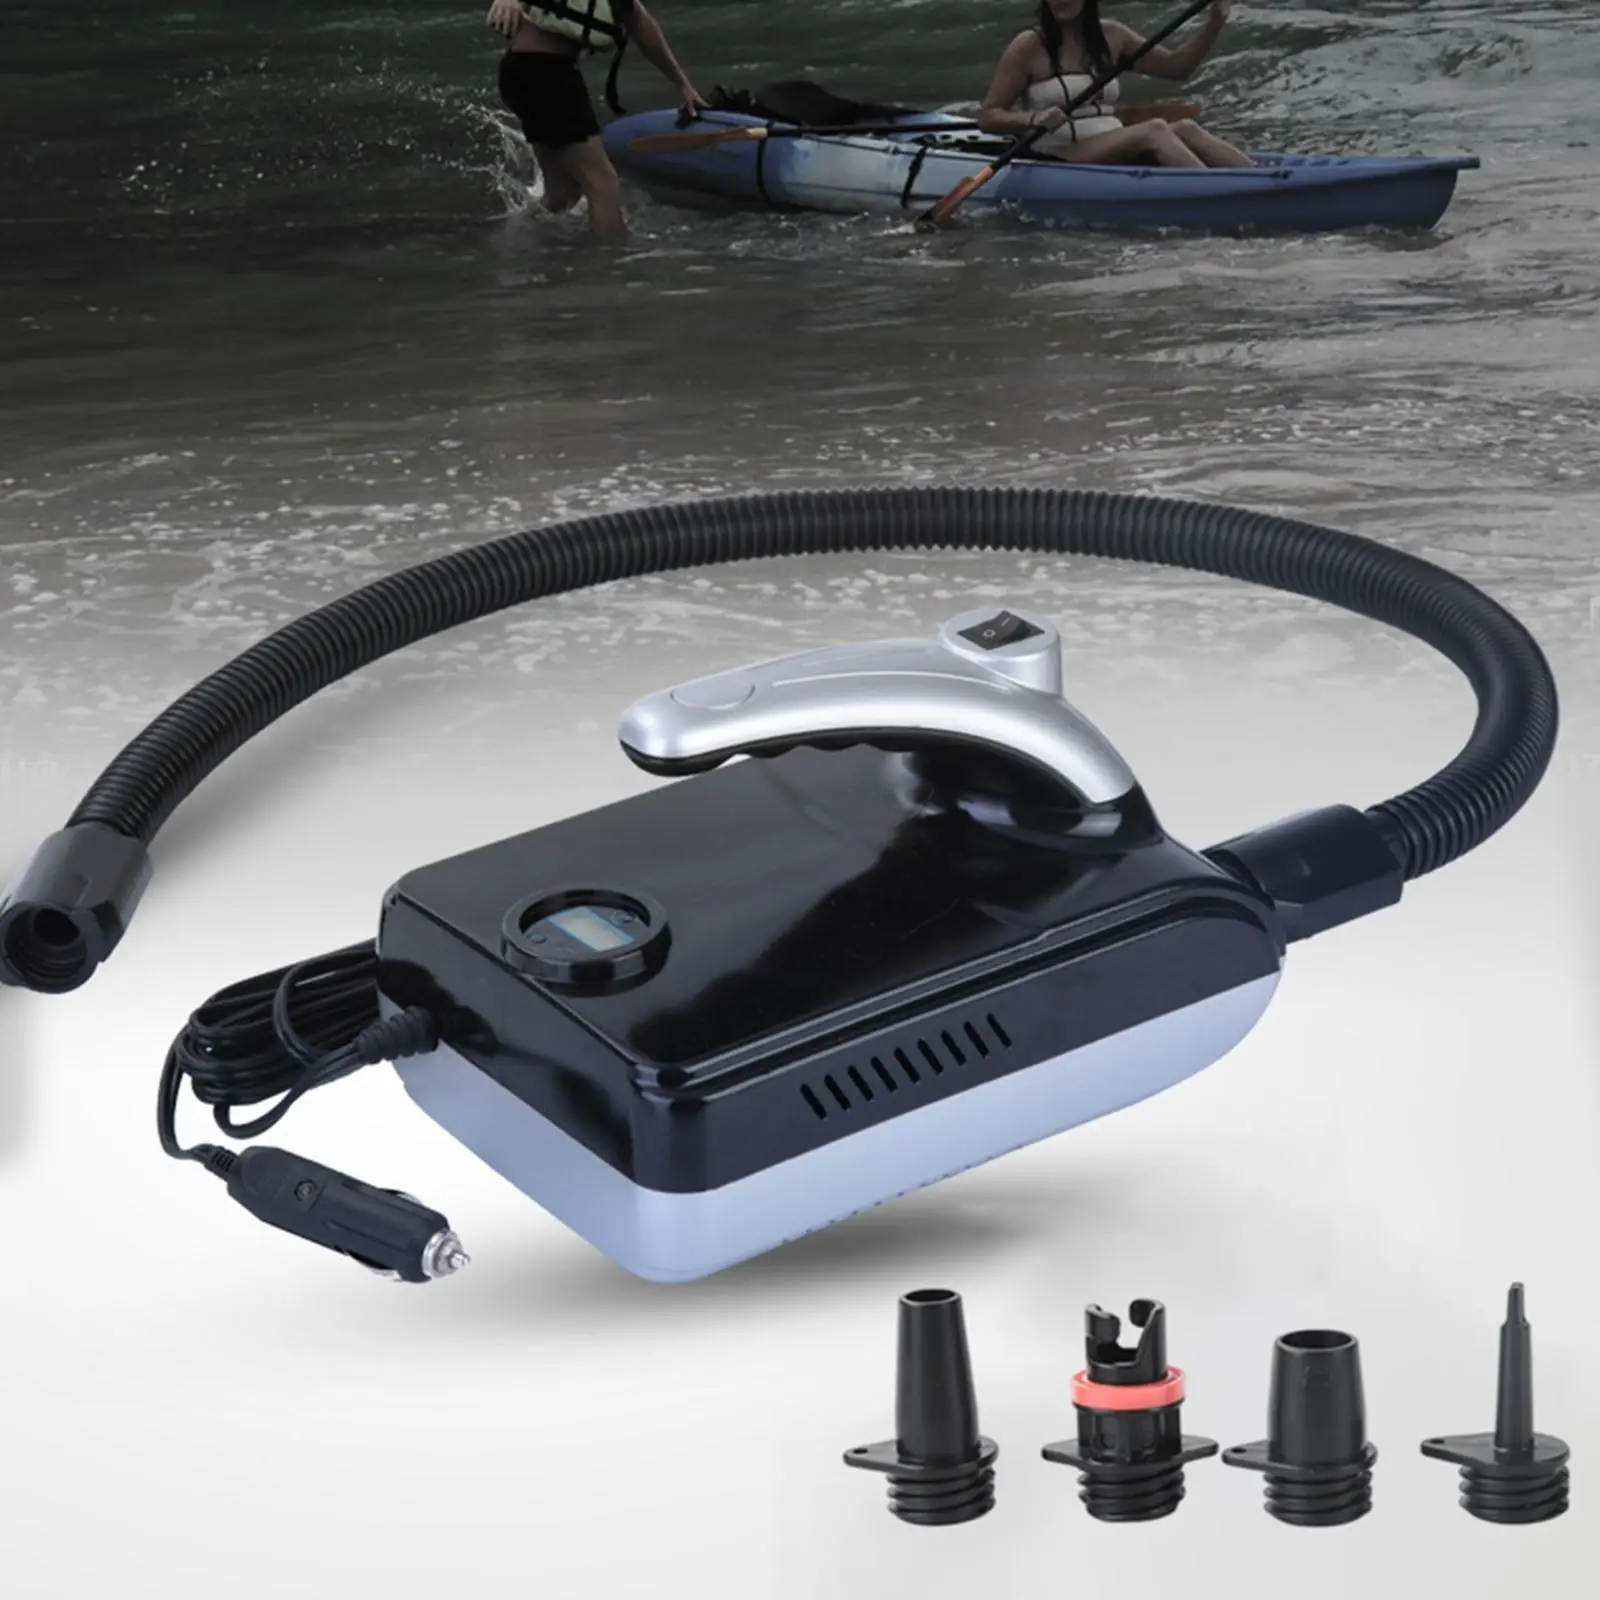 0~20PSI Electric Air Pump Quick Air Inflator Multifunction W/ 4 Nozzles with LED Digital Display Pump for Stand up Paddle